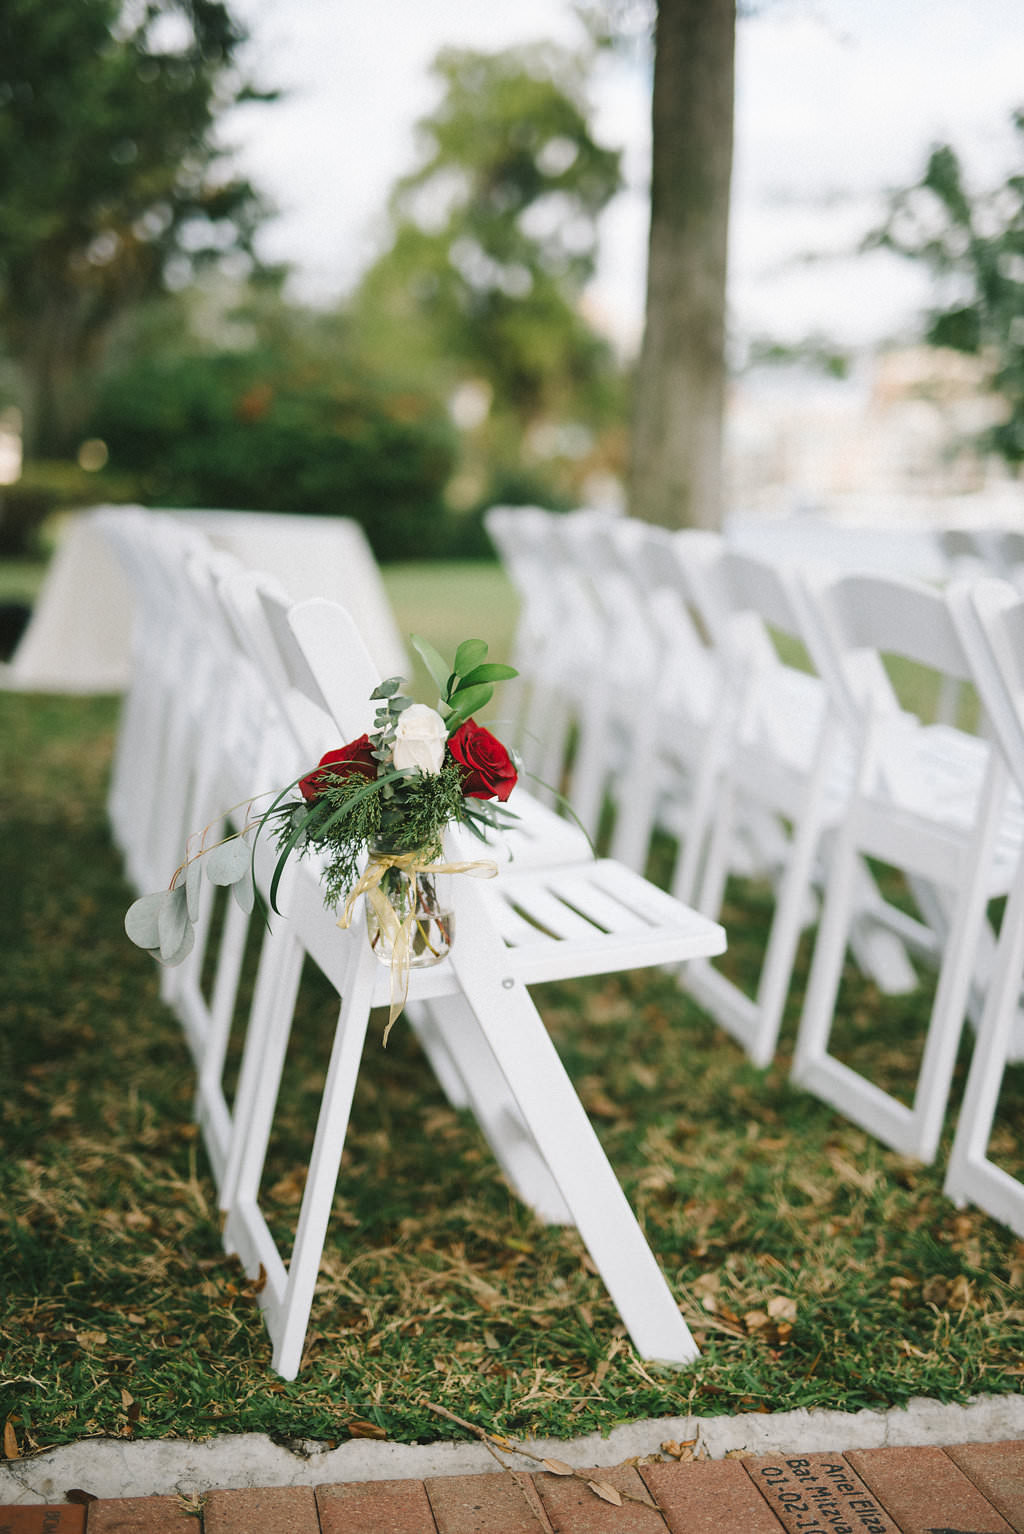 Outdoor Garden Wedding Ceremony Decor with White Wooden Folding Chairs, and Red and White Rose with Greenery Flowers with Twine